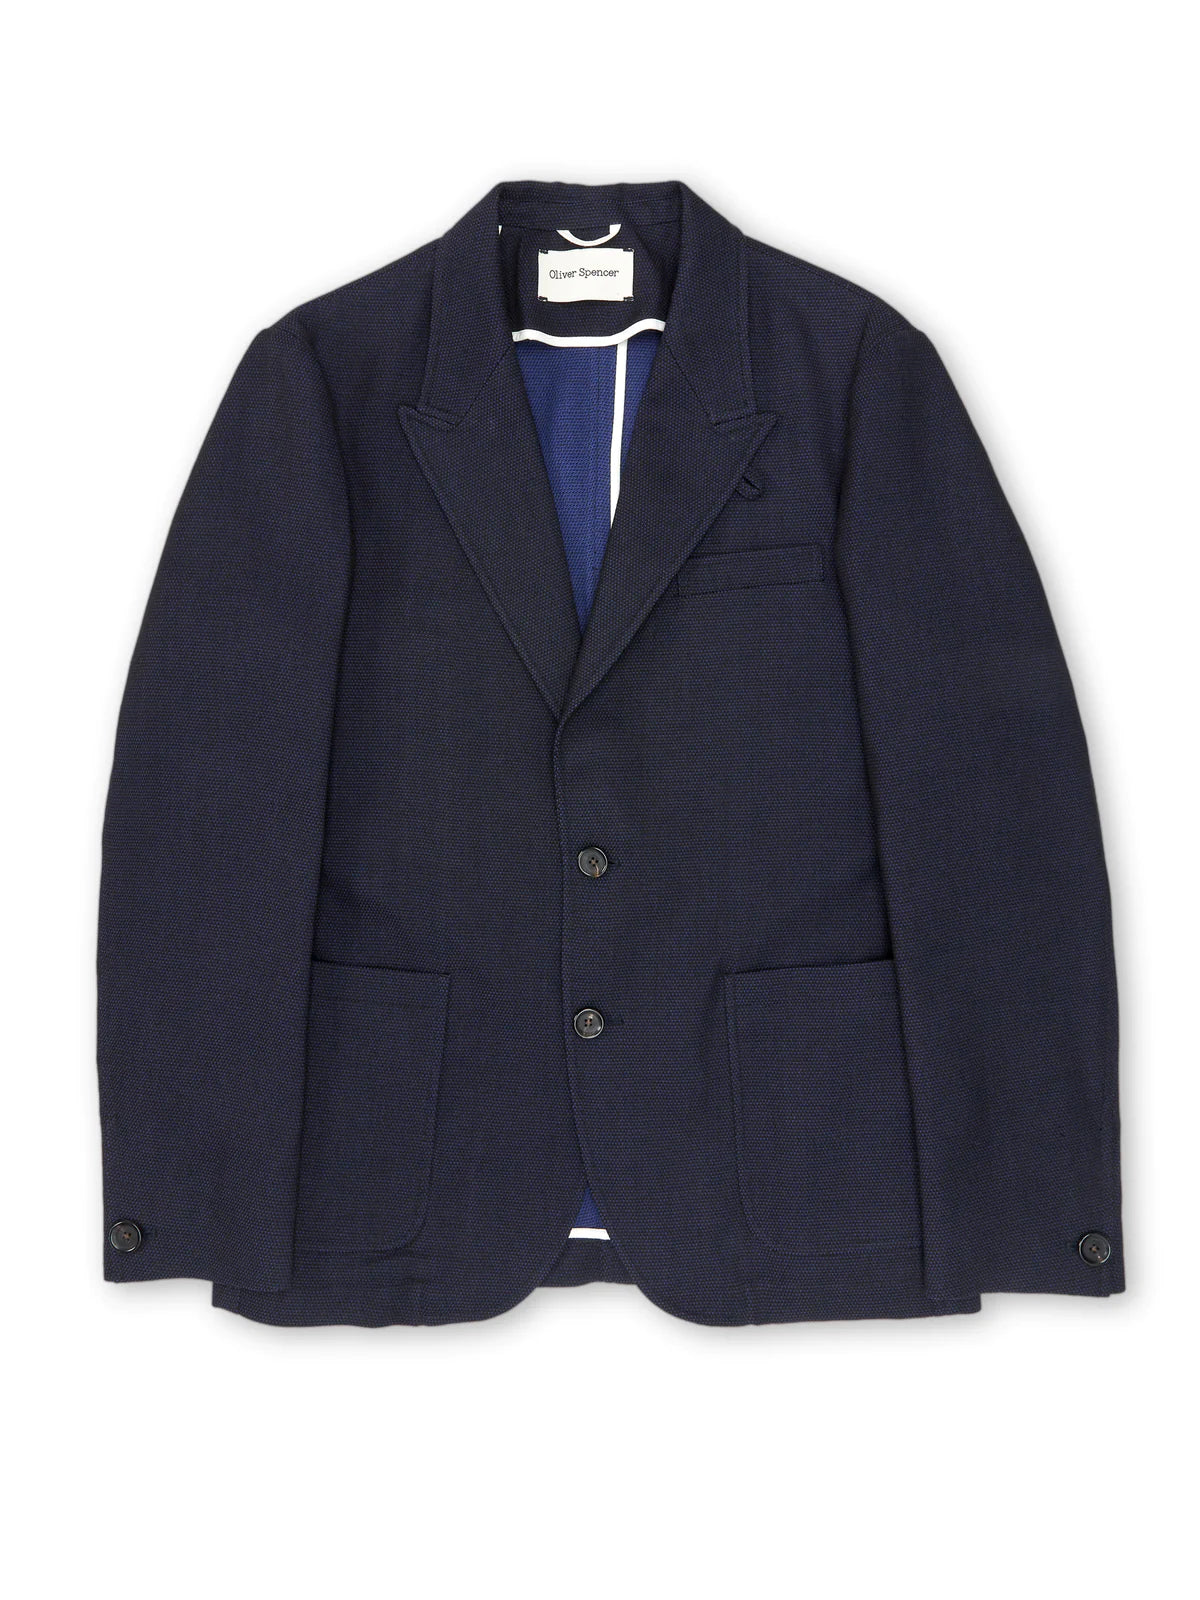 Mansfield Jacket Outerwear Oliver Spencer Navy 38 